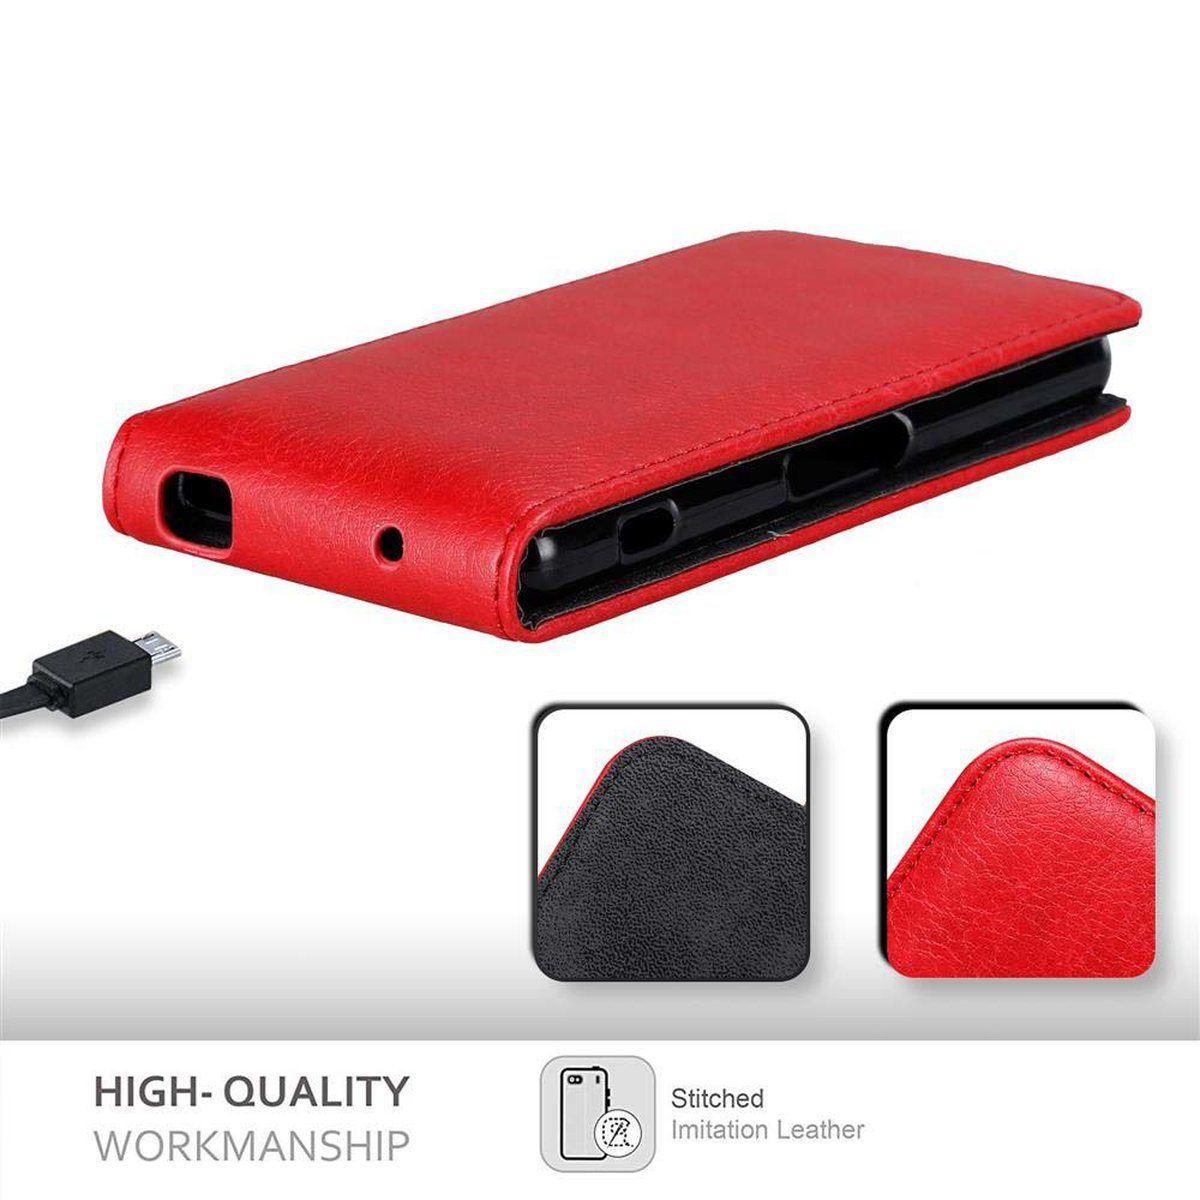 Cover, Xperia ROT COMPACT, Flip CADORABO Sony, APFEL Flip im Z3 Hülle Style,